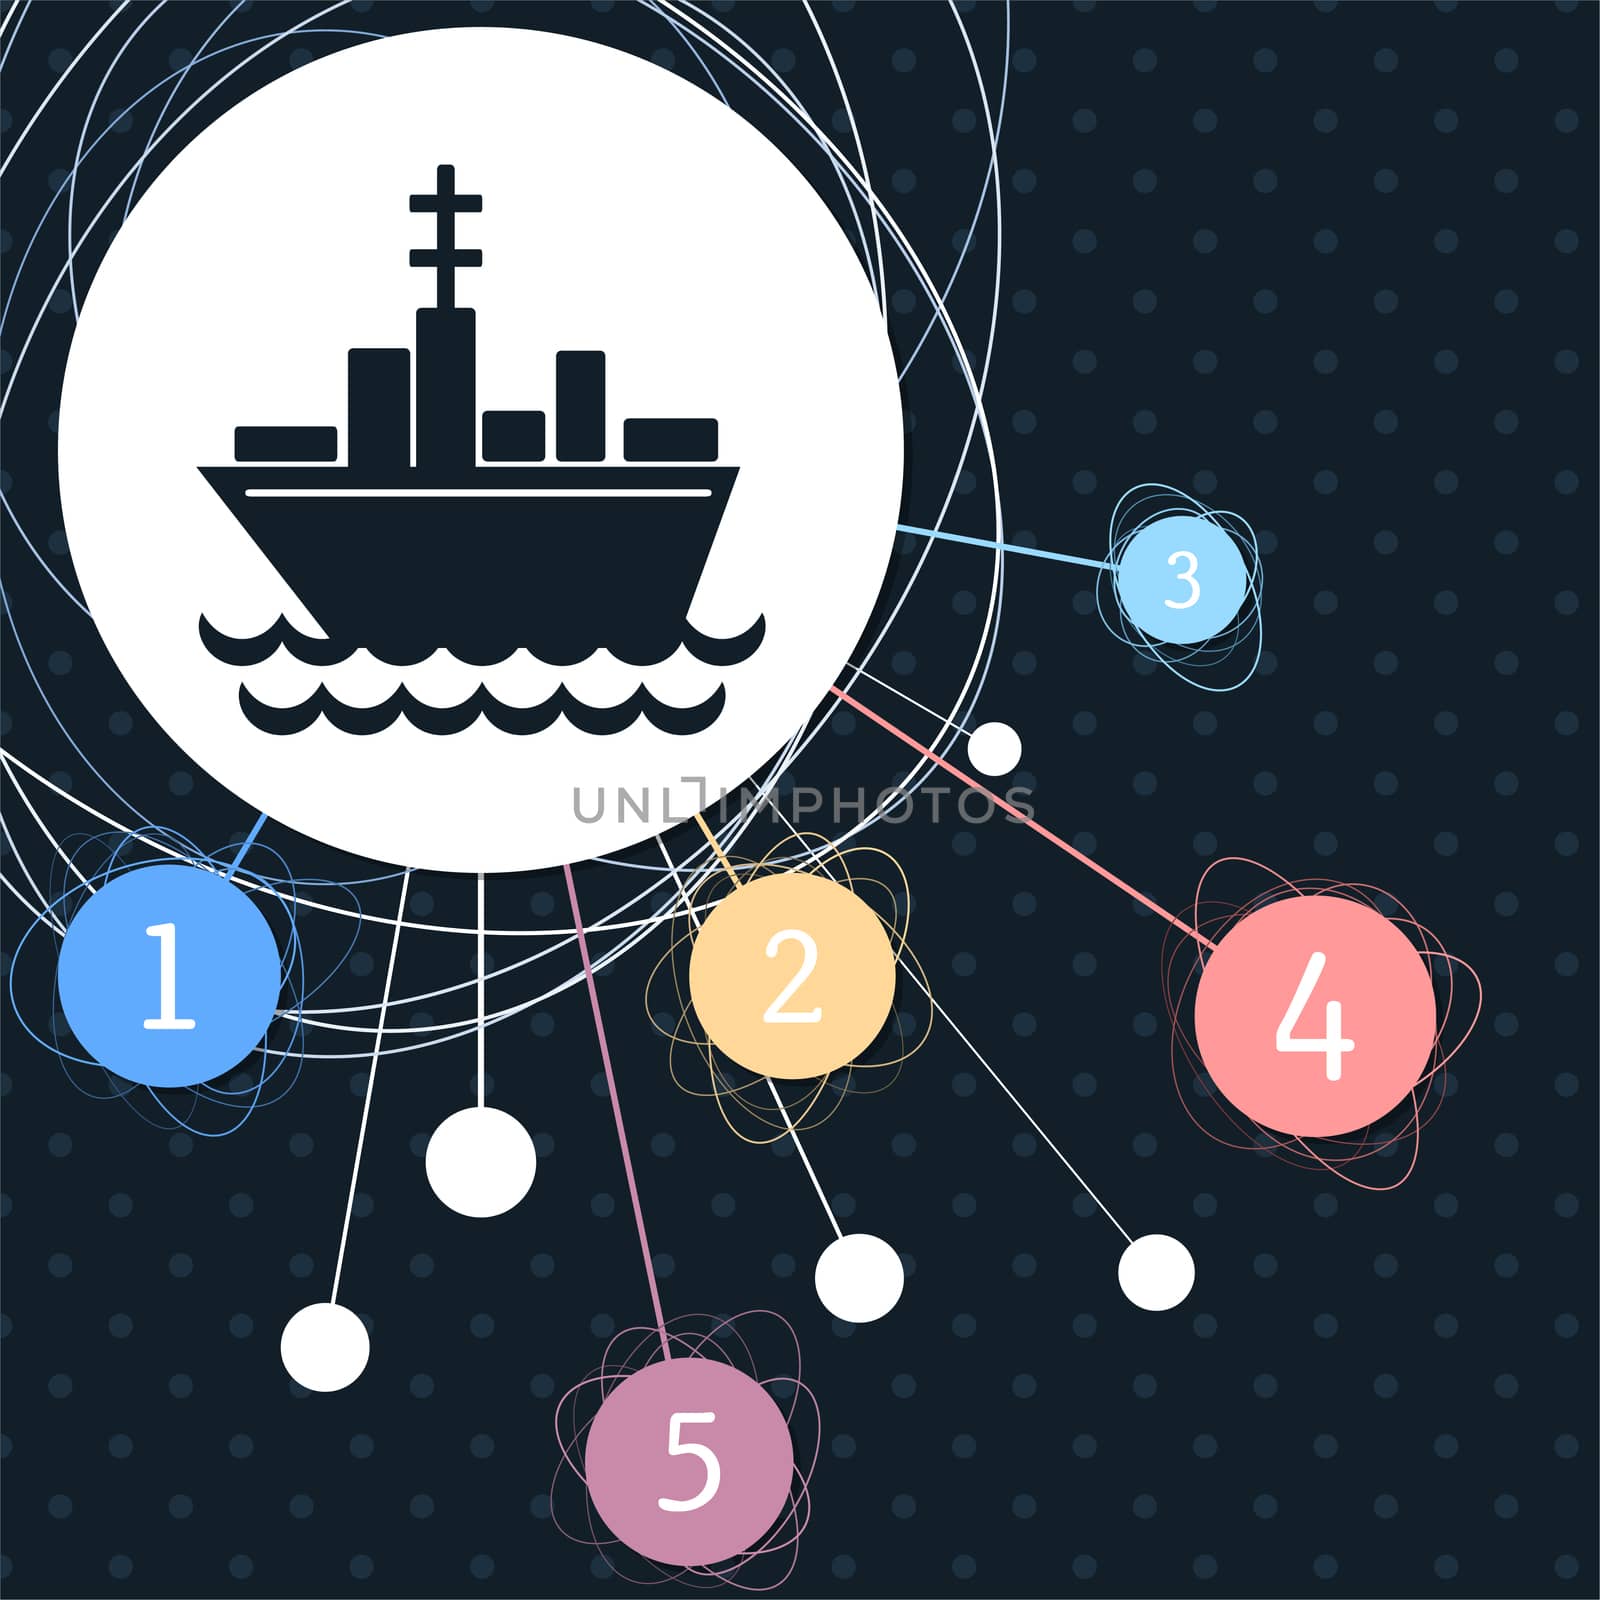 Ship boat icon with the background to the point and infographic style.  by Adamchuk